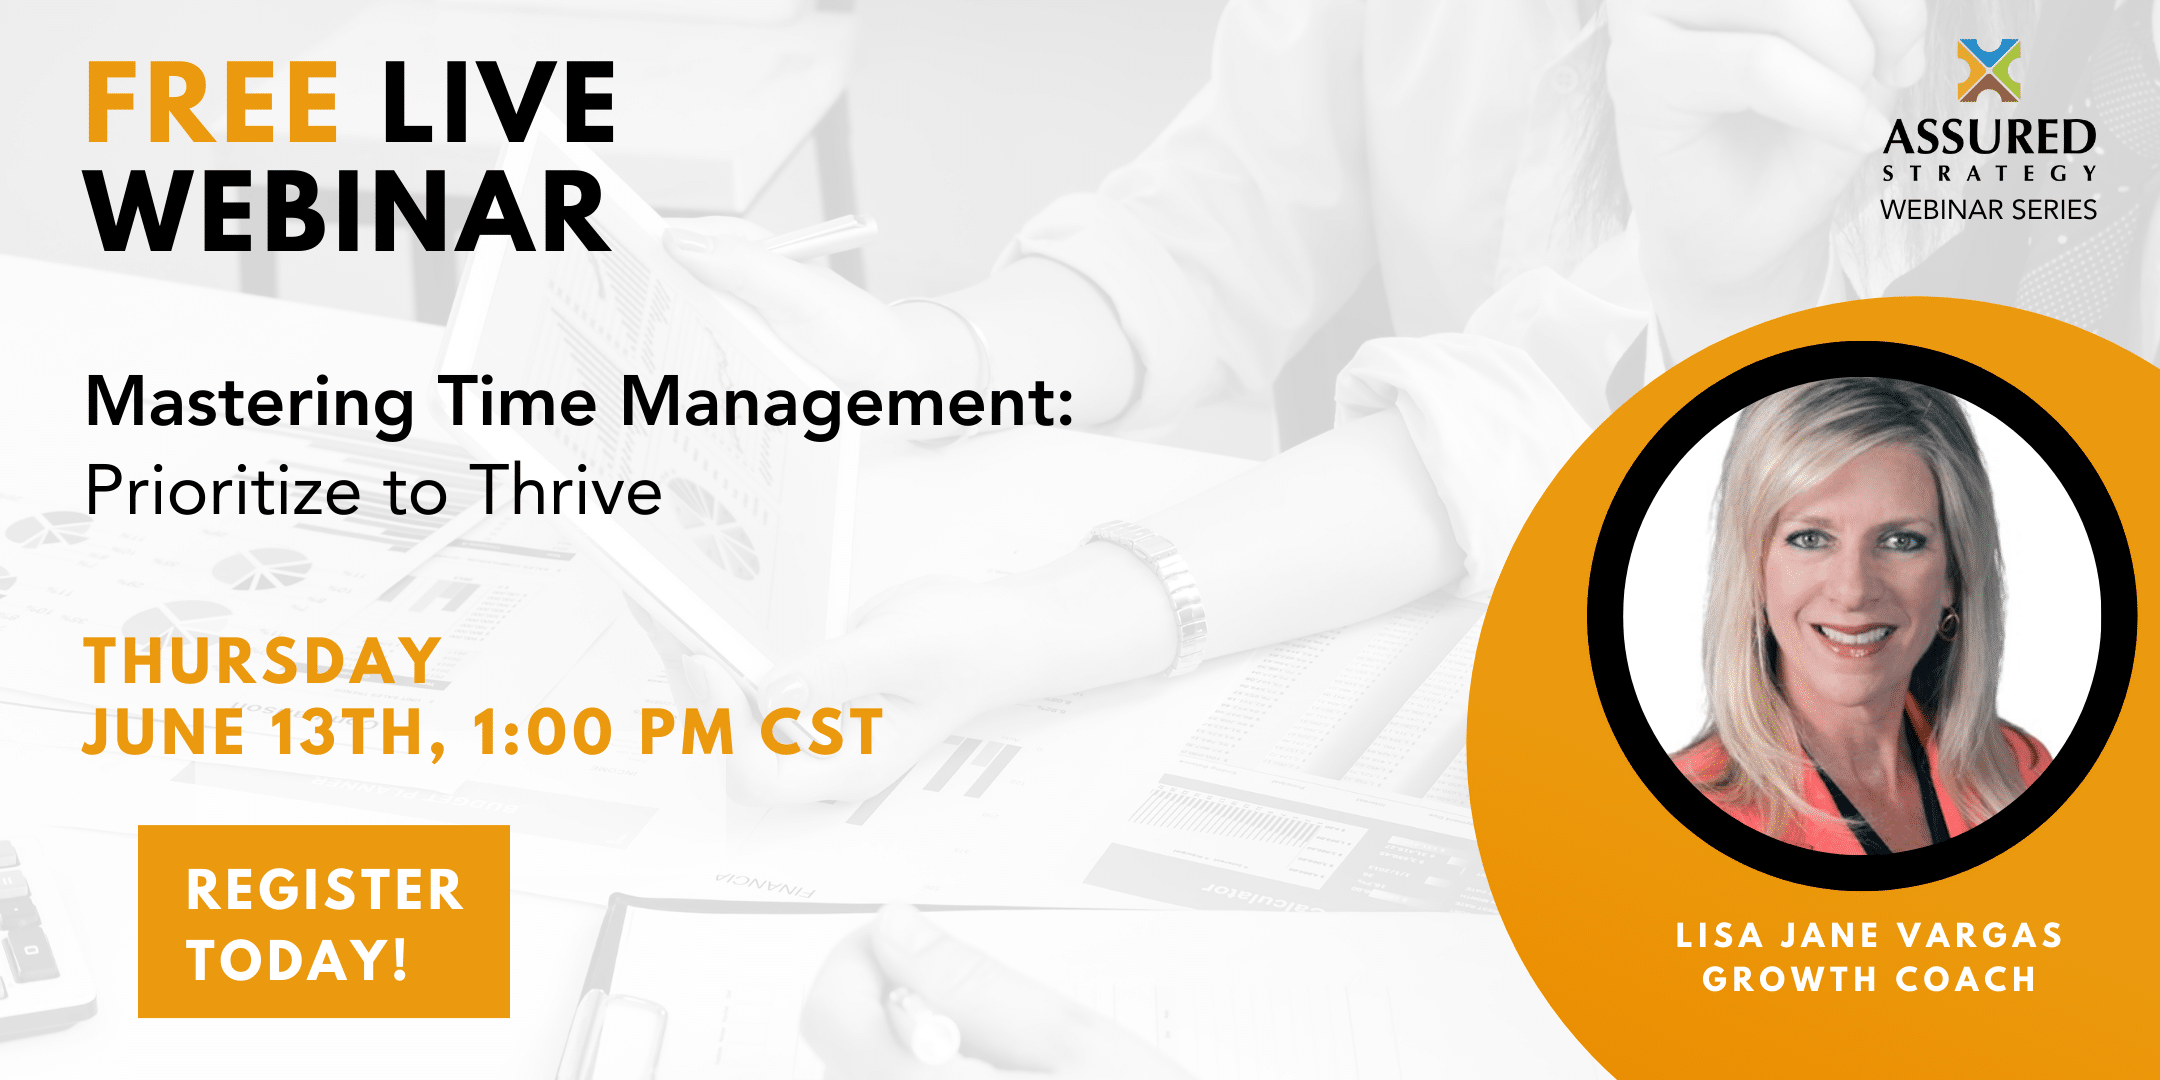 Webinar - June 13 - Mastering Time Management: Prioritize to Thrive